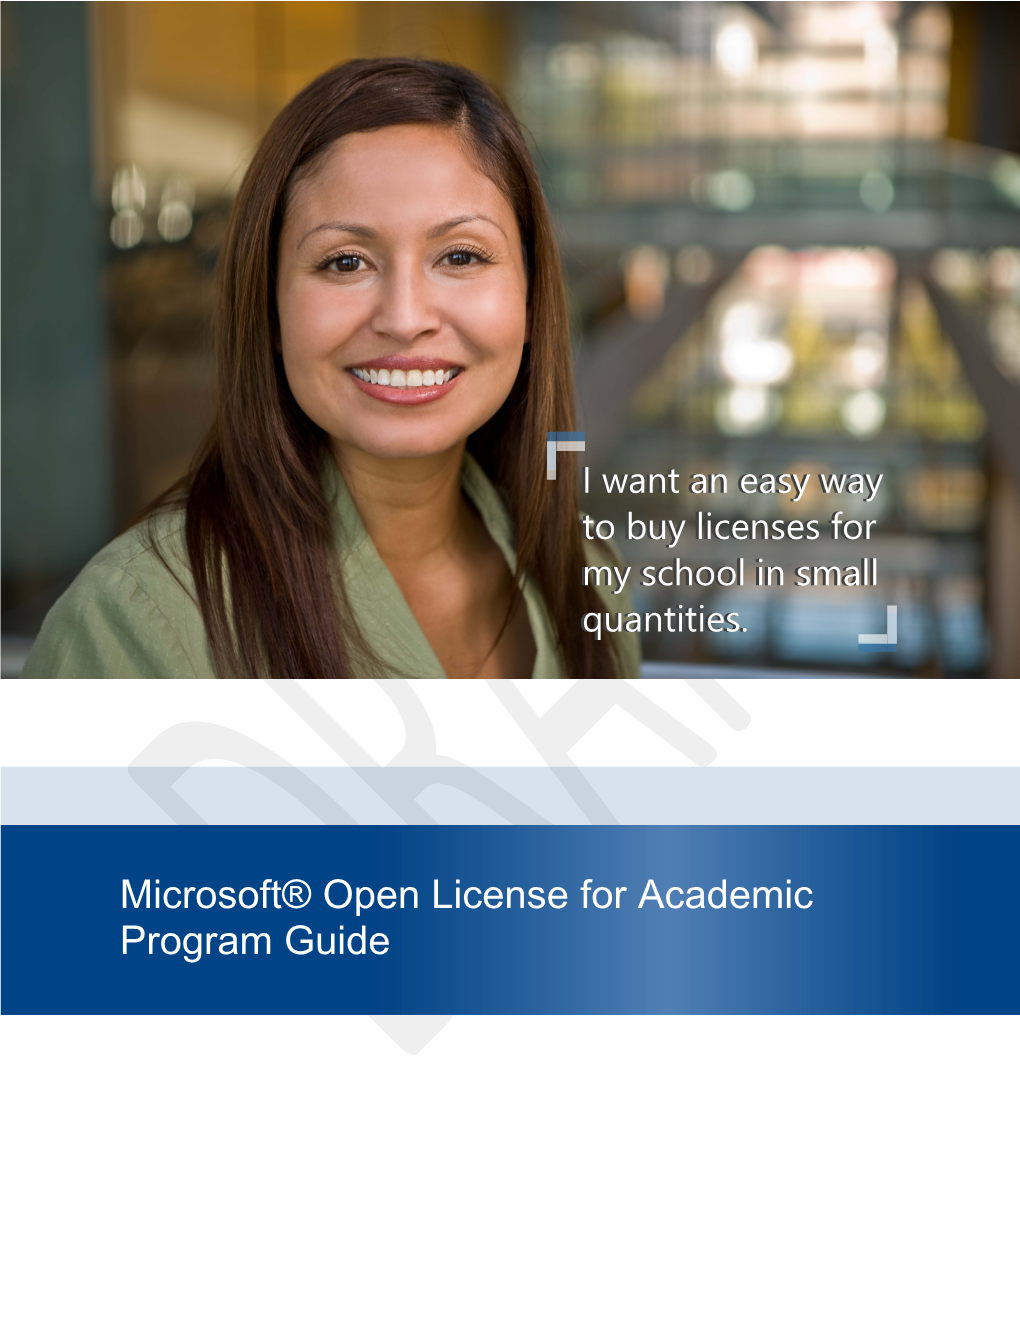 Open License for Academic Features and Benefits